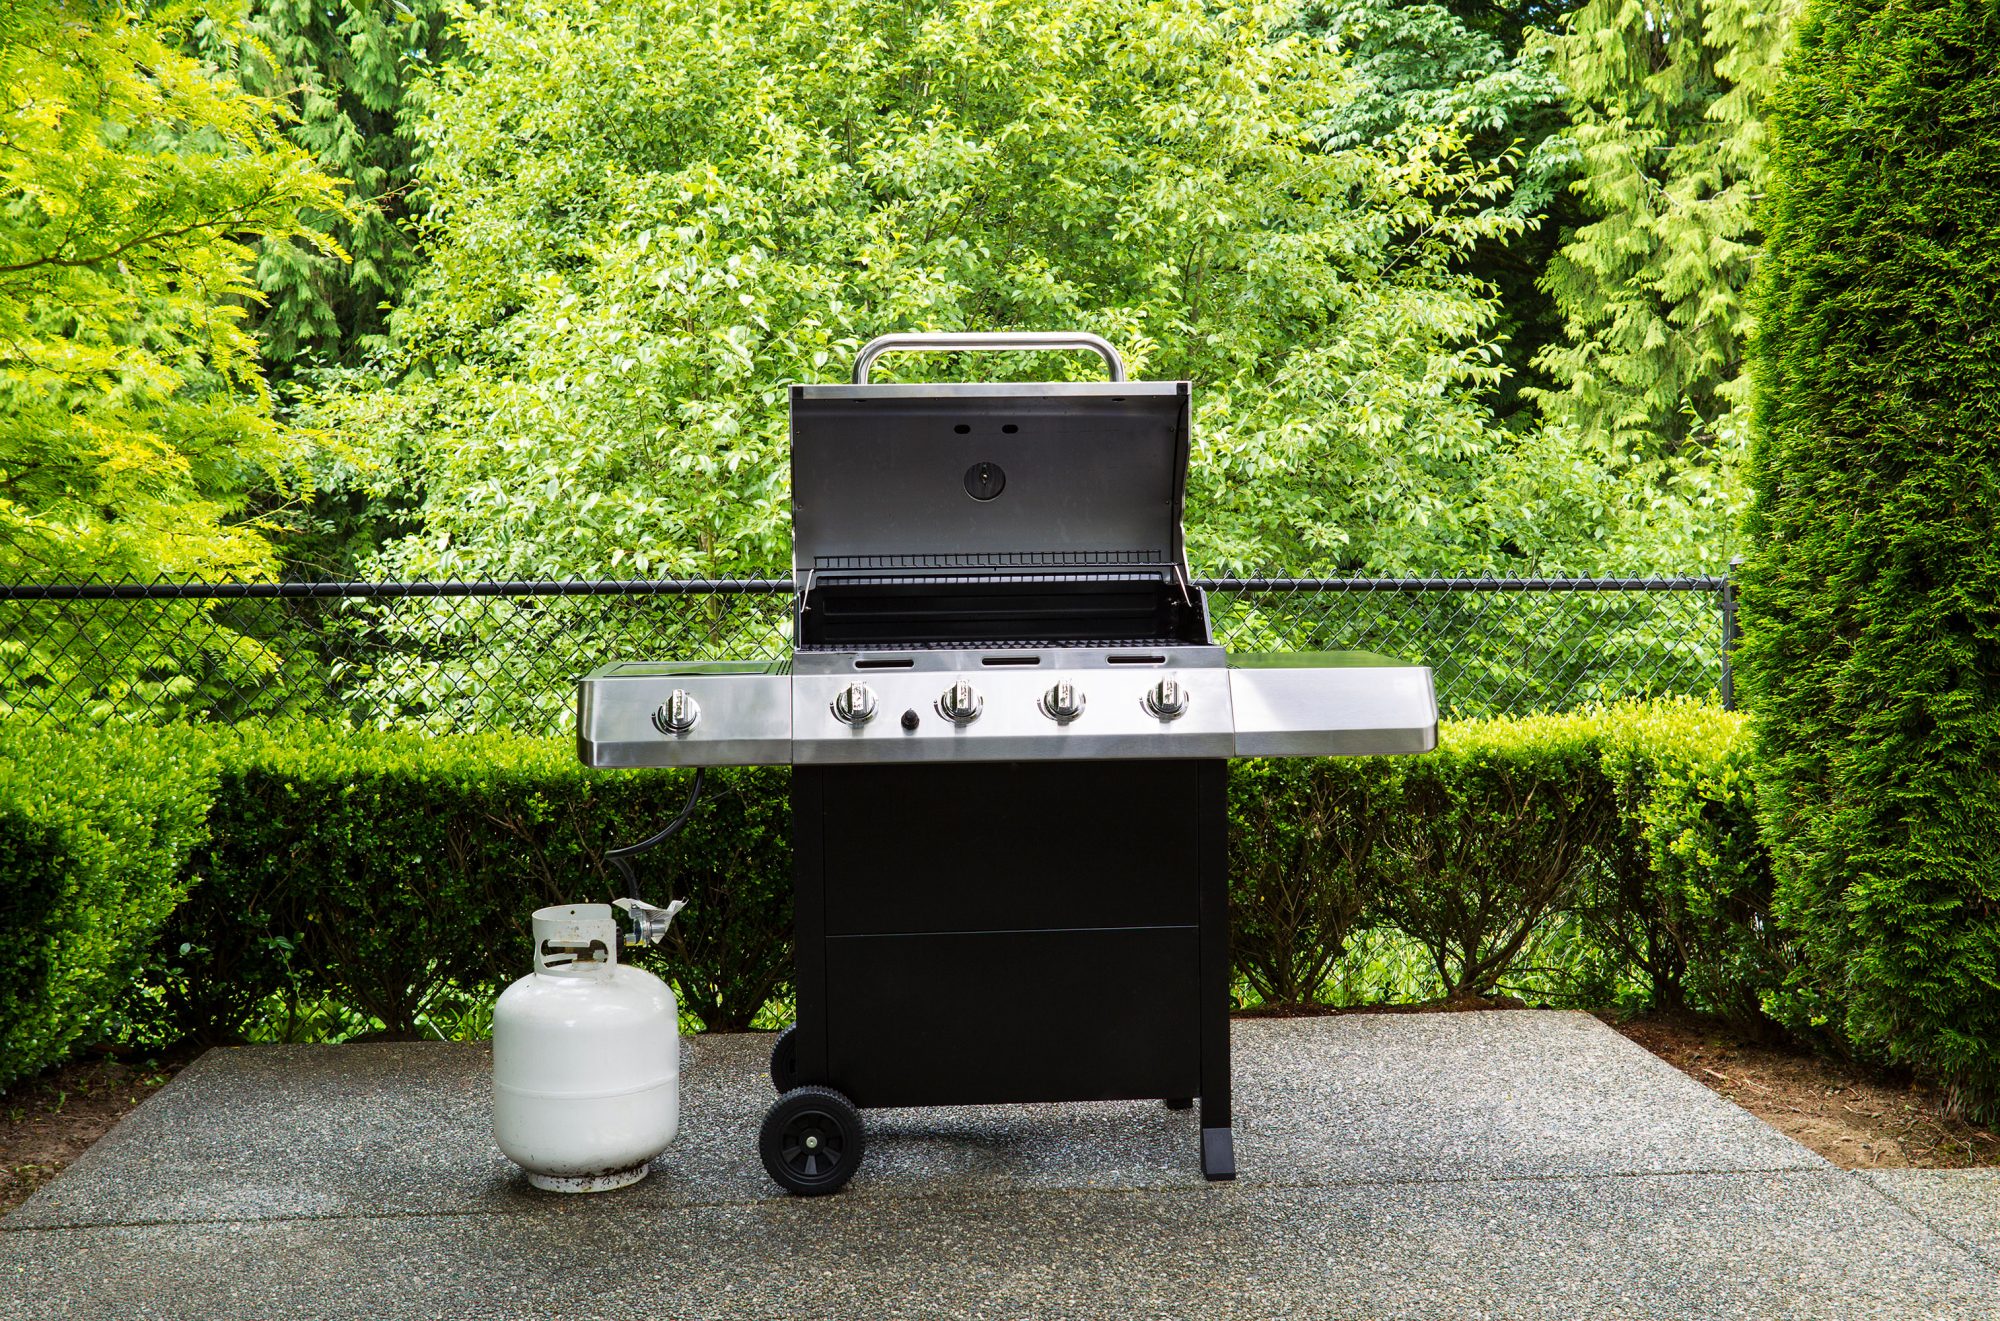 Uitgaan accent Azië Why Is My Propane Grill Tank Making Hissing Noises? | MyRecipes